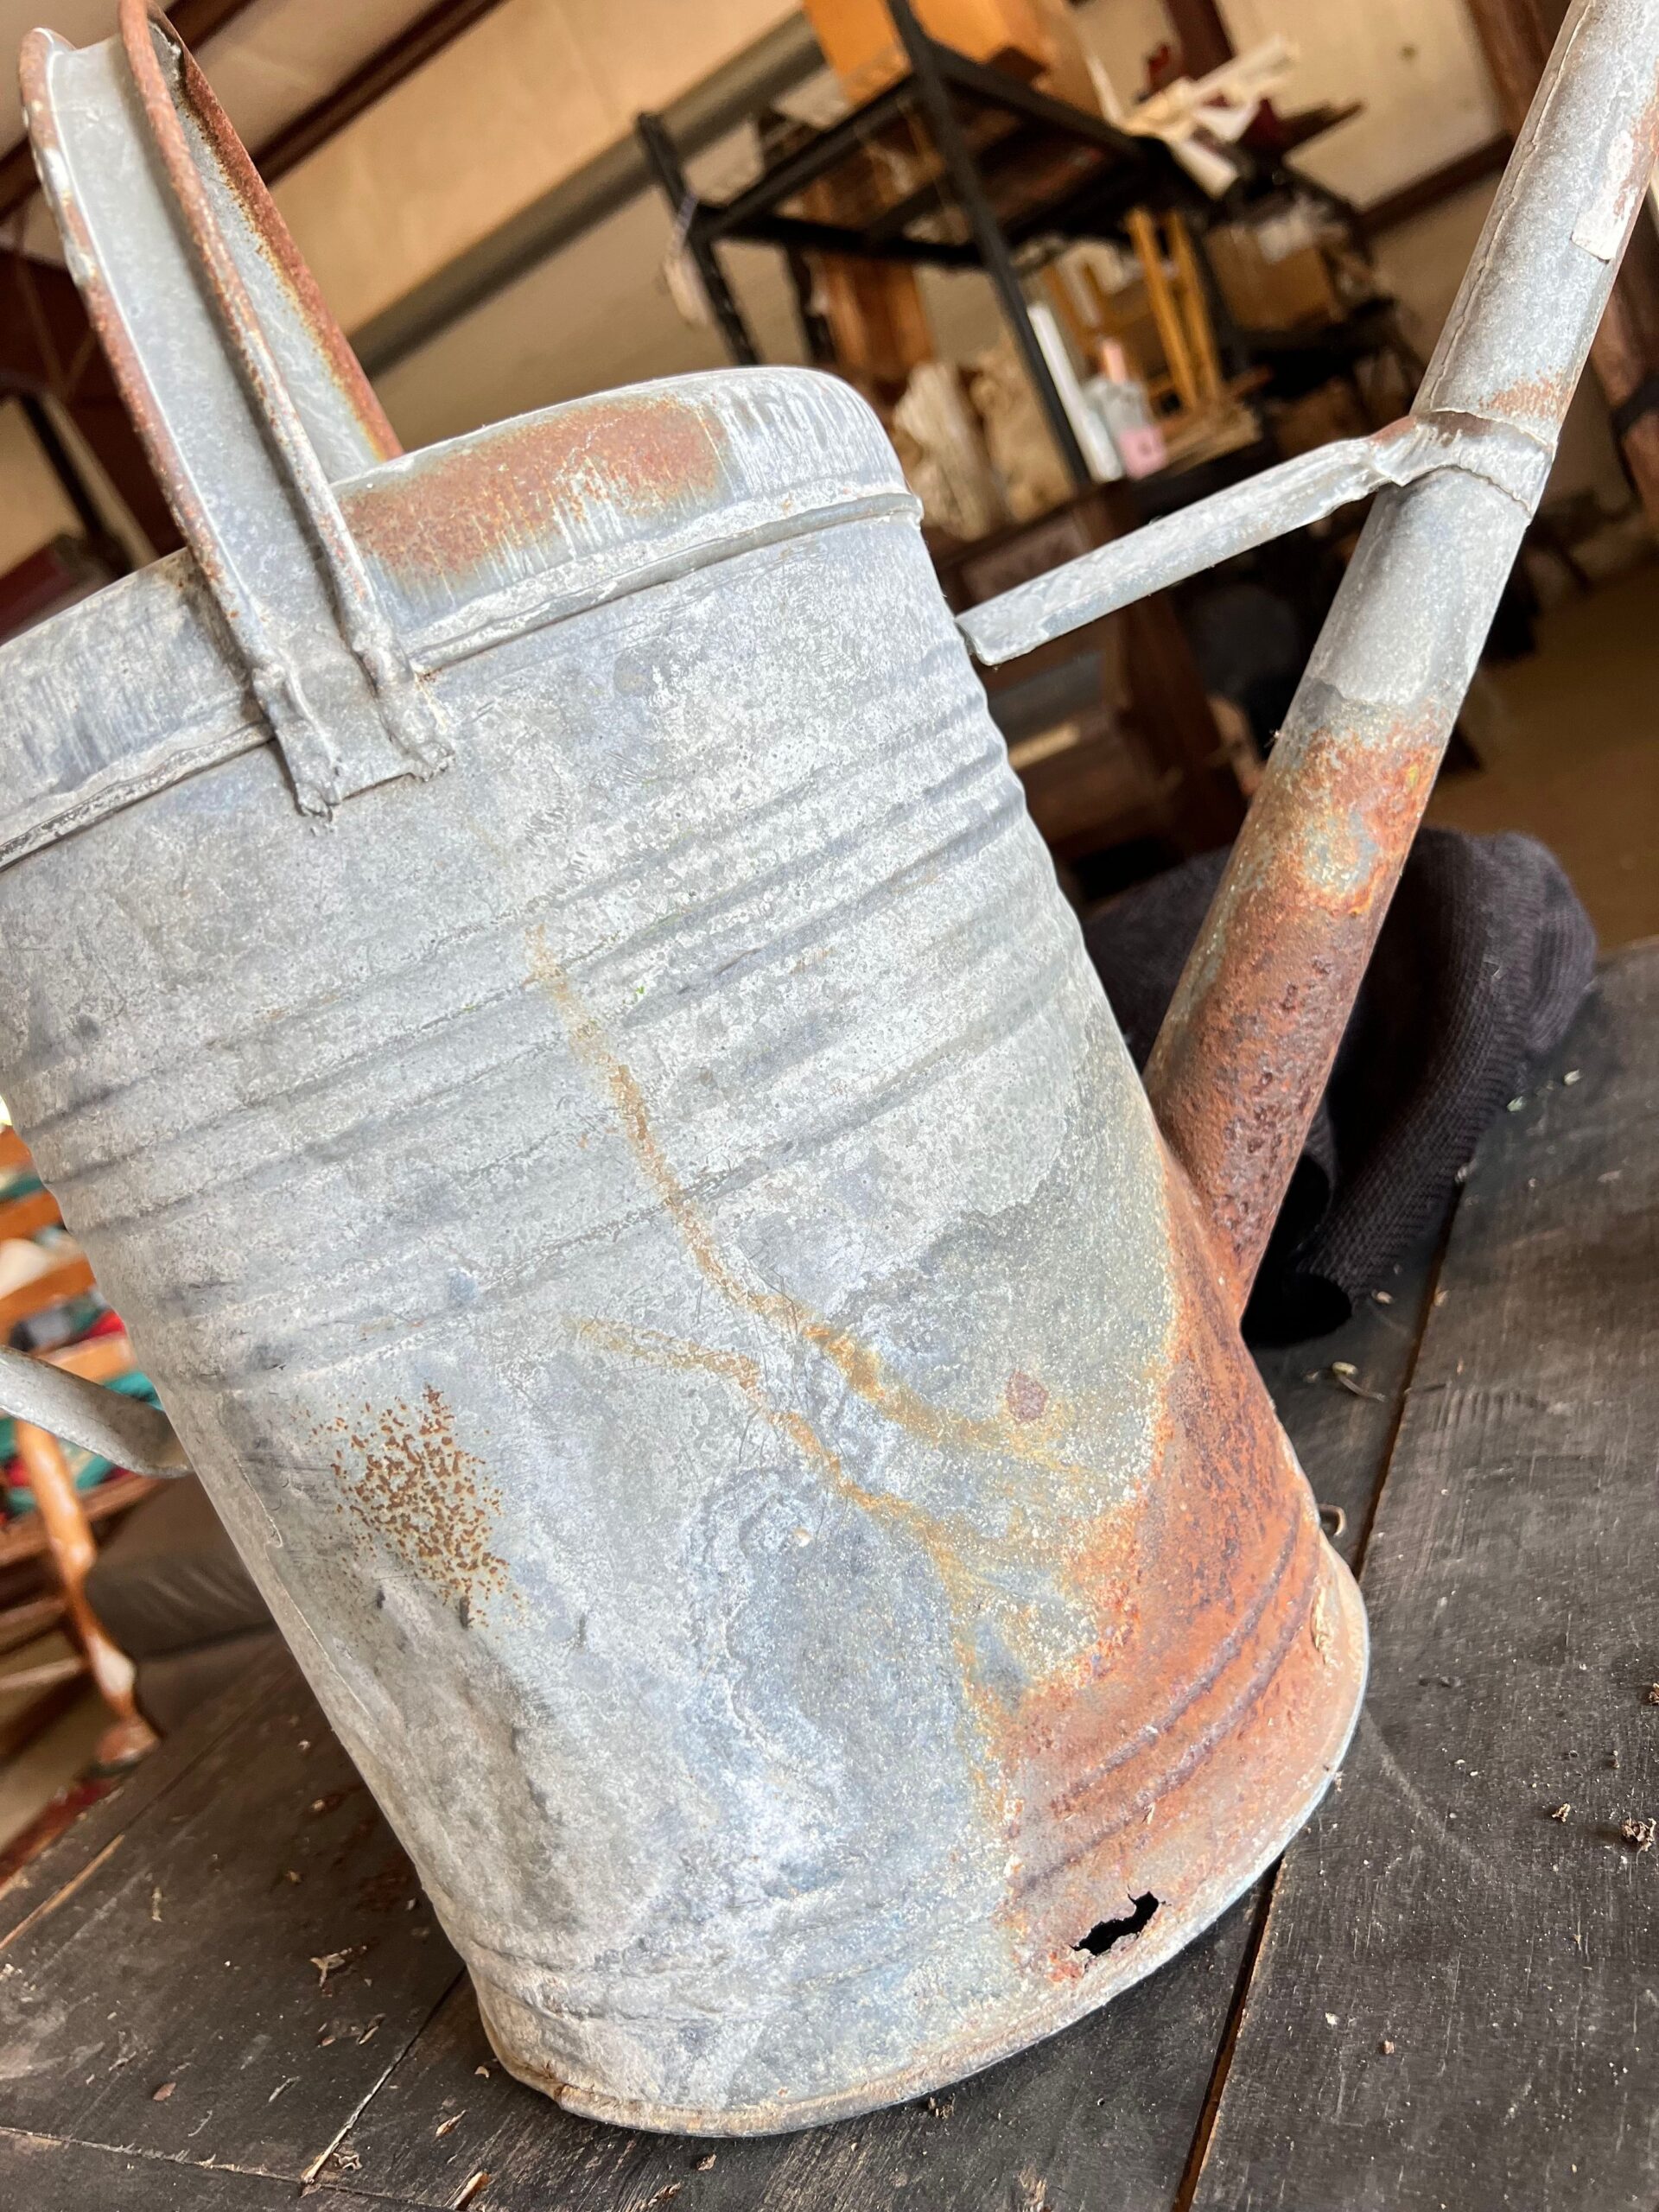 old watering can that's about to be filled with poison!! (jk)